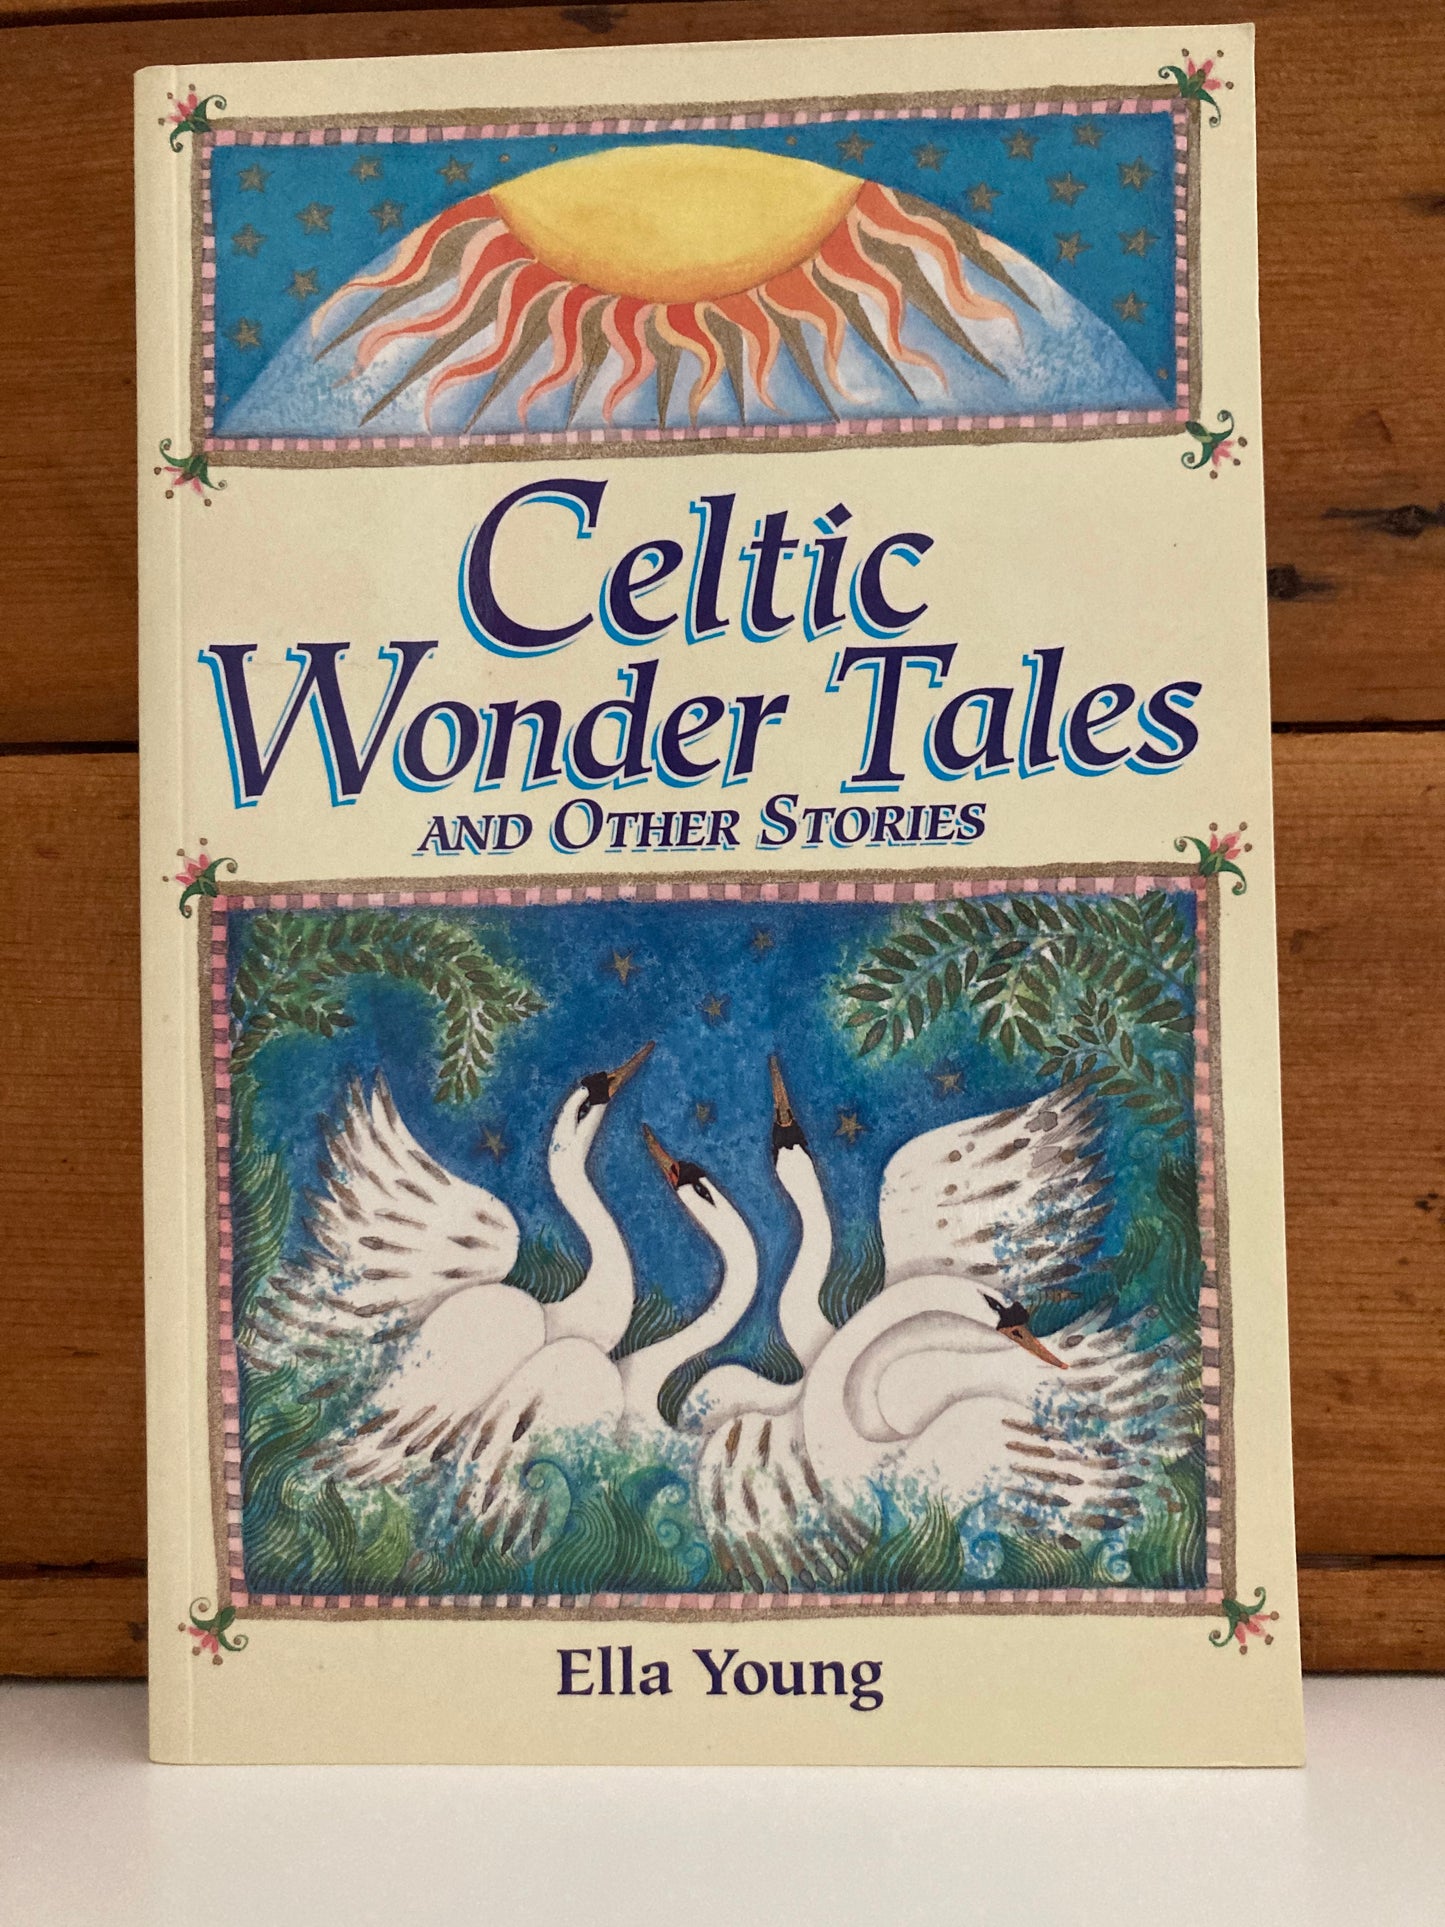 Resource Book, Mythology and Tales - CELTIC WONDER TALES